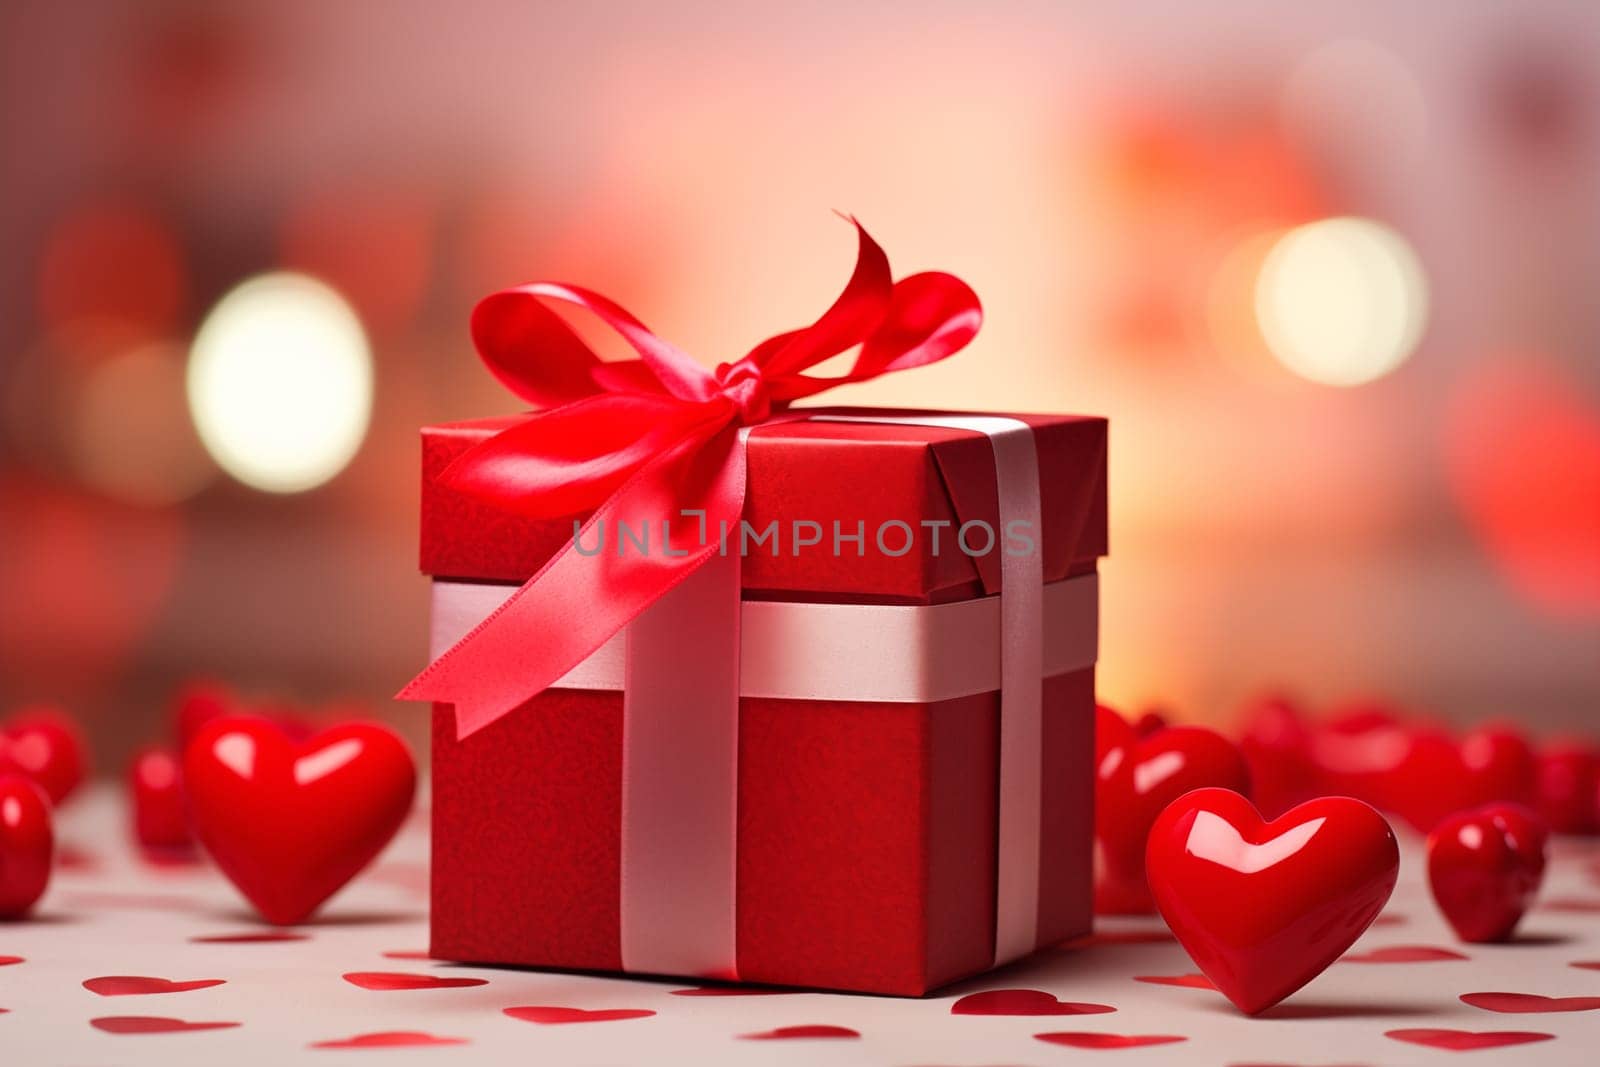 Romantic Valentine’s Gift - Red Box with Bow Amidst Glowing Hearts by dimol